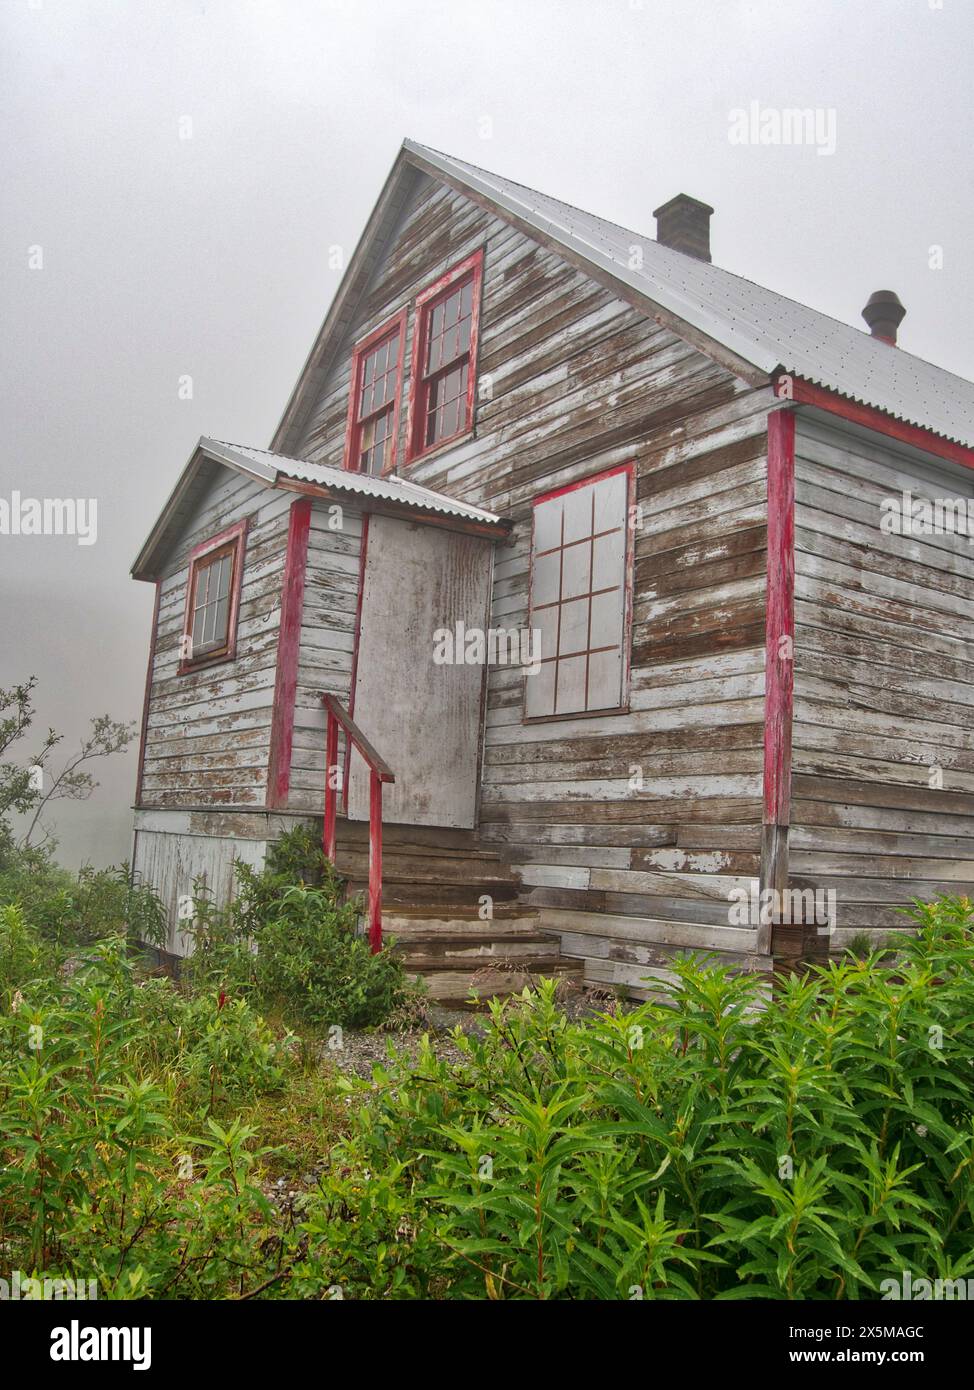 USA, Alaska. Independence Mine State Historical Park listed on the National Register of Historic Places, a former gold mining operation in the Talkeet Stock Photo